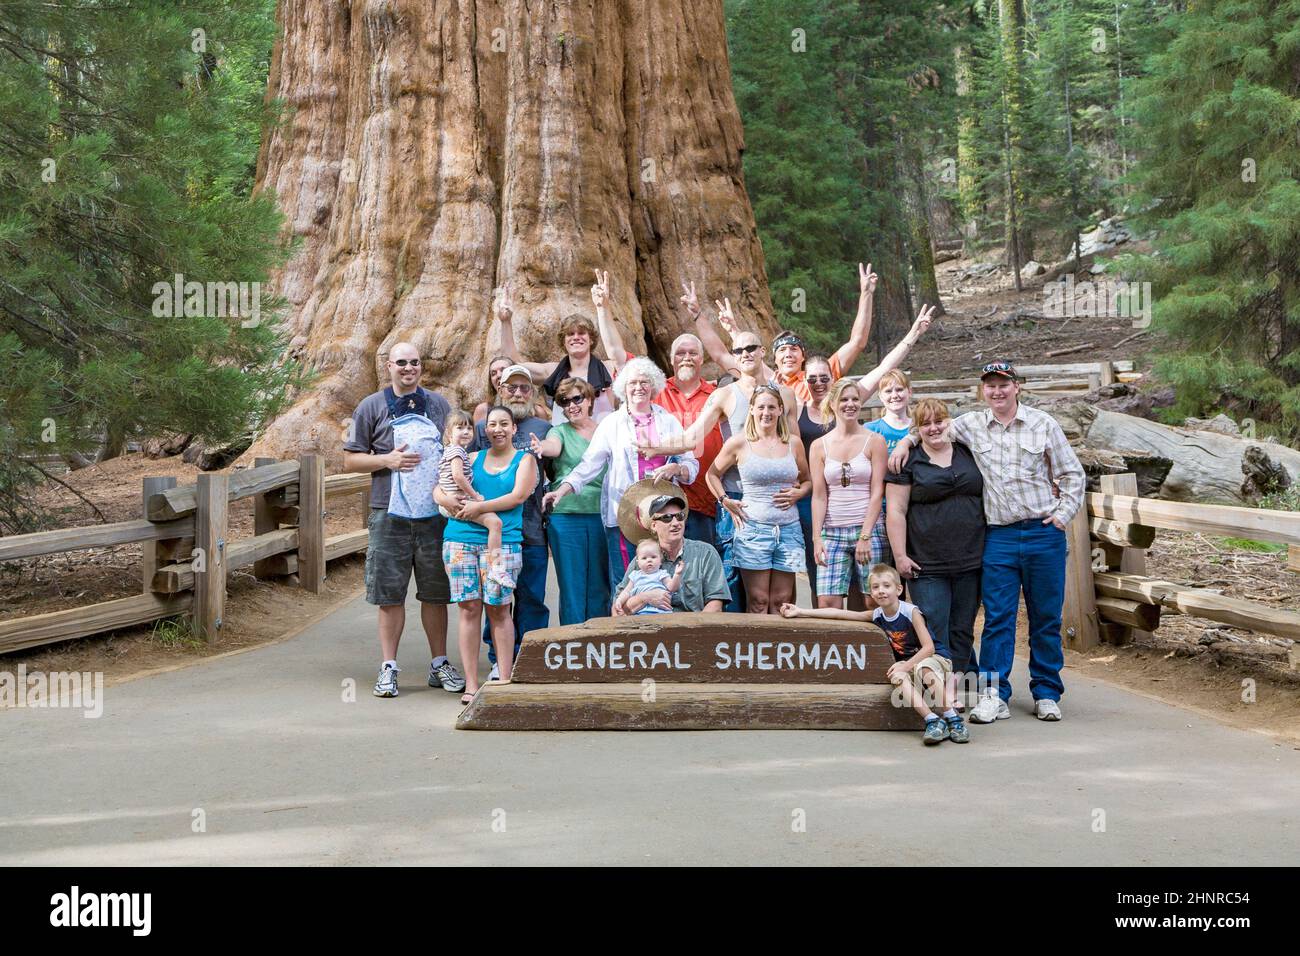 people have a selfie in front of General sherman tree in the sequoia national park Stock Photo